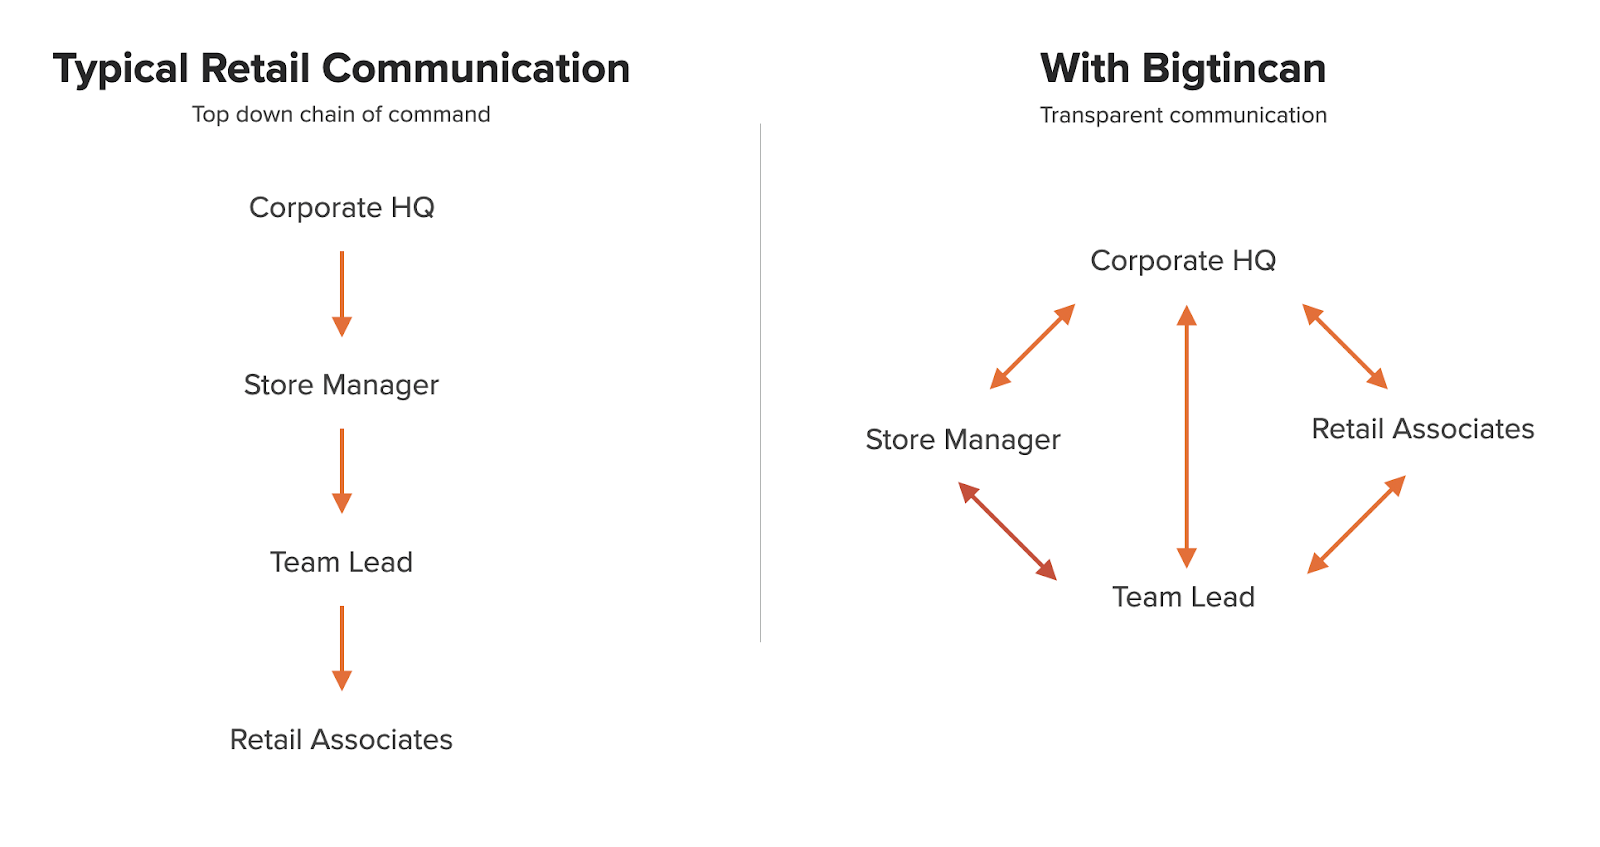 Typical Retail Communication: Corporate HQ > Store Manager > Team Lead > Retail Associates; With Bigtincan: Transparent Communication between Corporate HQ and the Team Lead along with Store Managers and Retail Associates